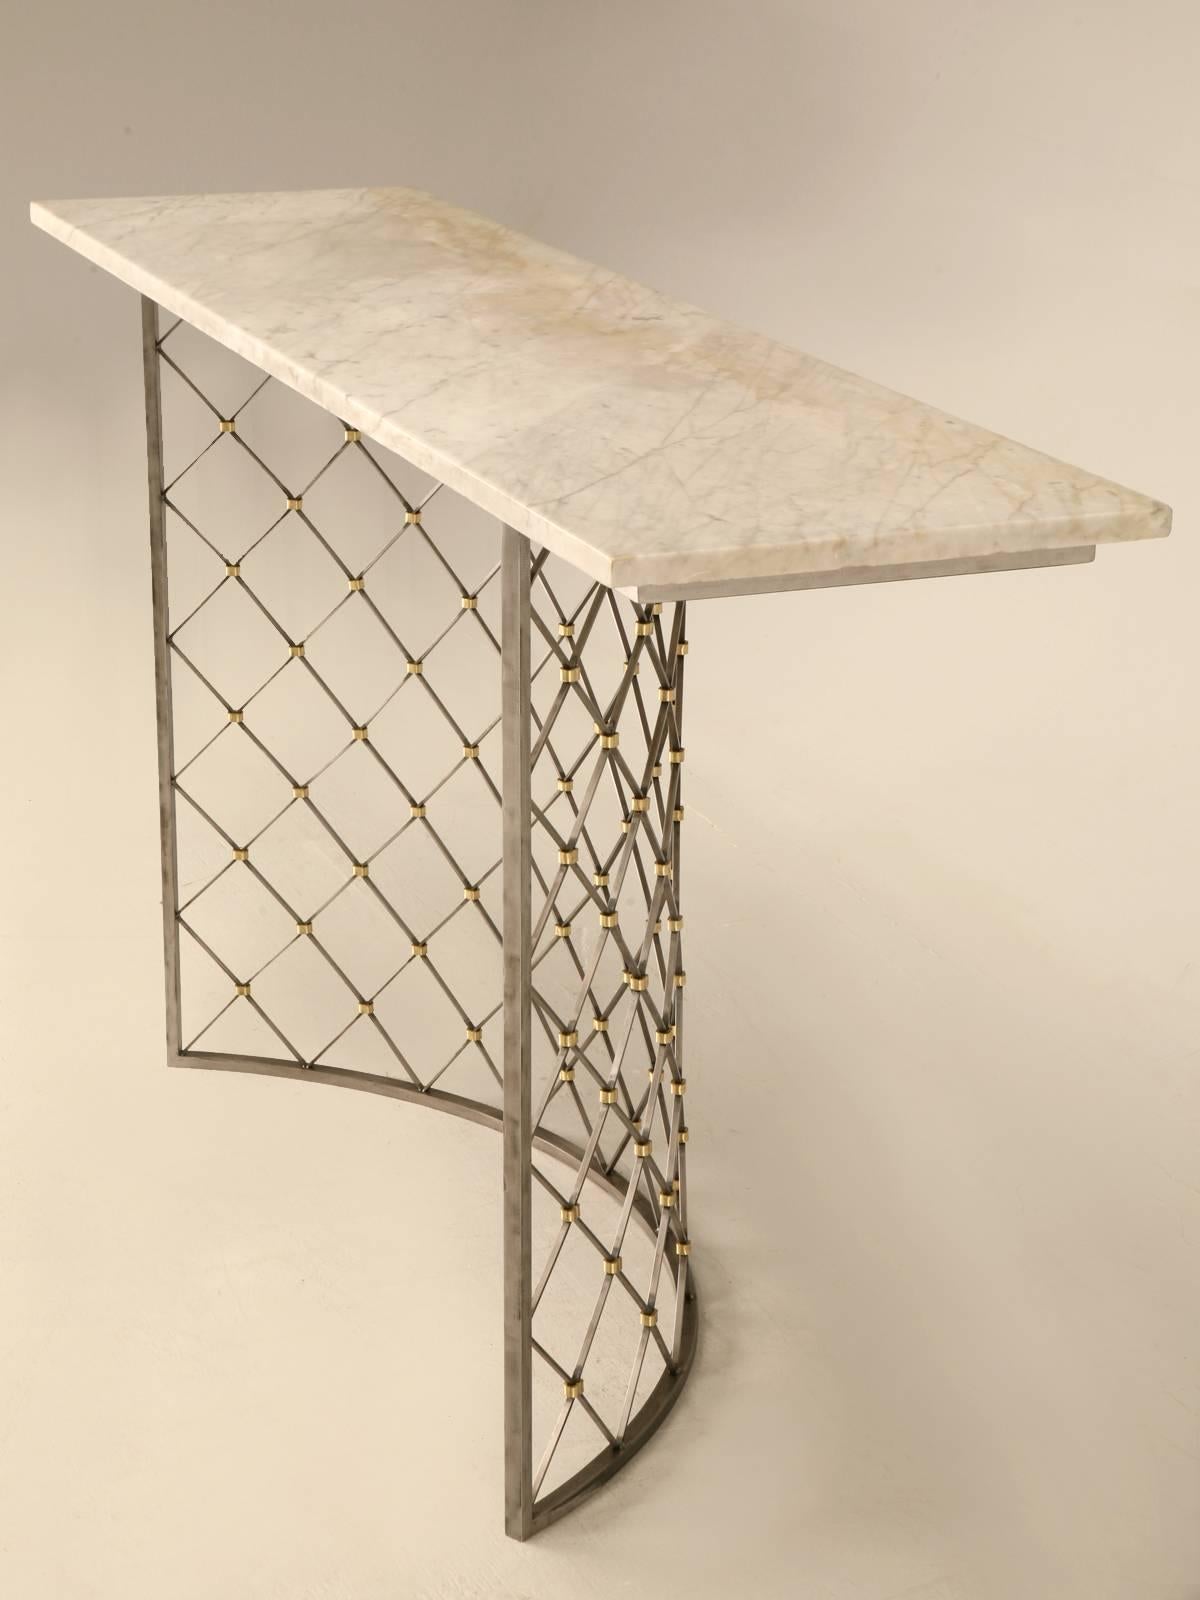 Mid-Century Modern style, coated steel cross-hatch console table has brass rings at each intersection creating a stunning design. This particular table was topped off with stone, but any material can be used for the top. We can reproduce this table